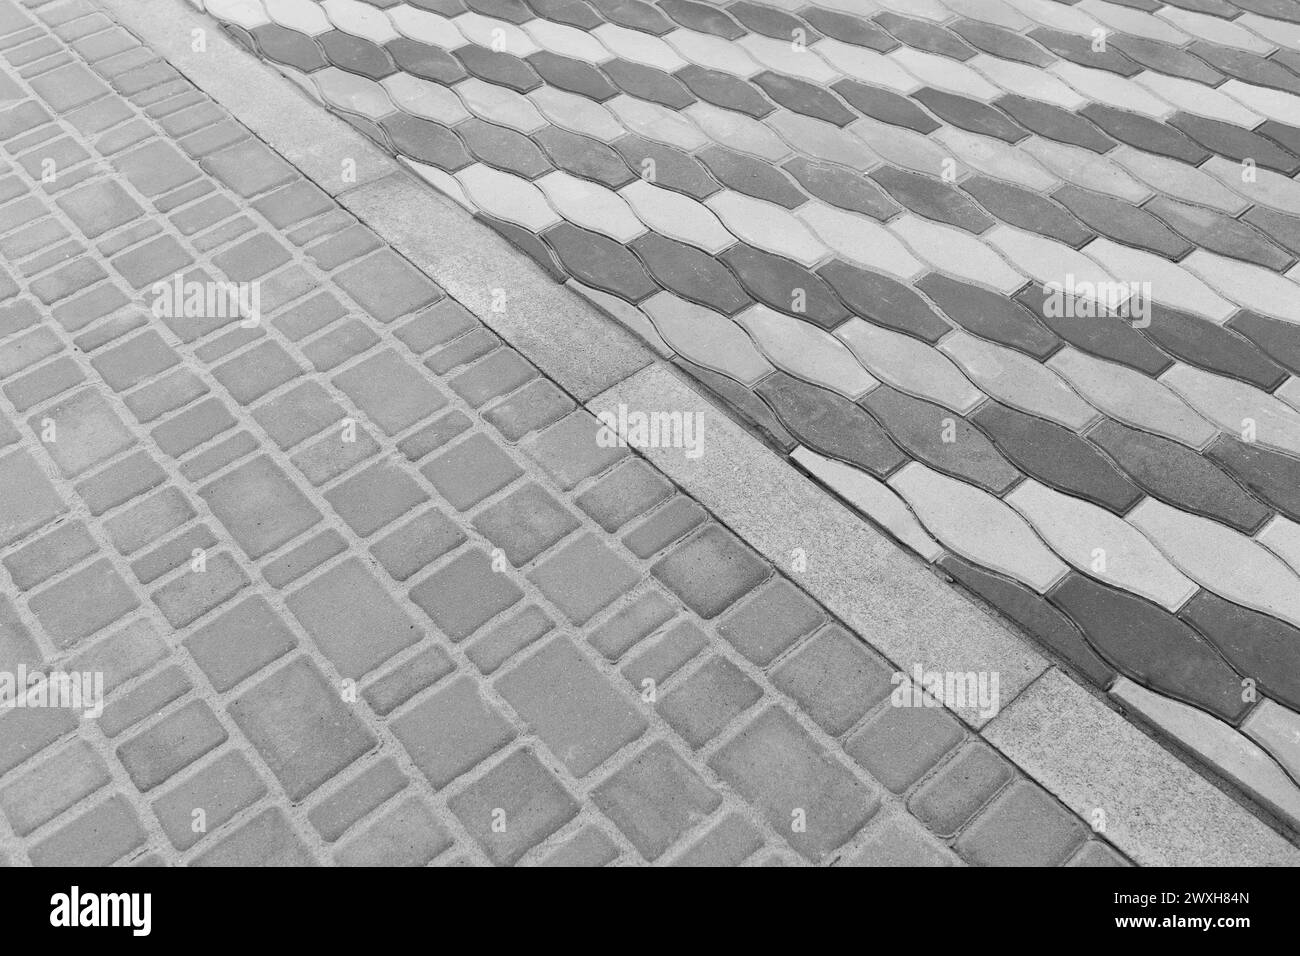 Two Kinds Paving Tiles Dividing Border Curb Mosaic Stone Street Road City Texture Background. Stock Photo